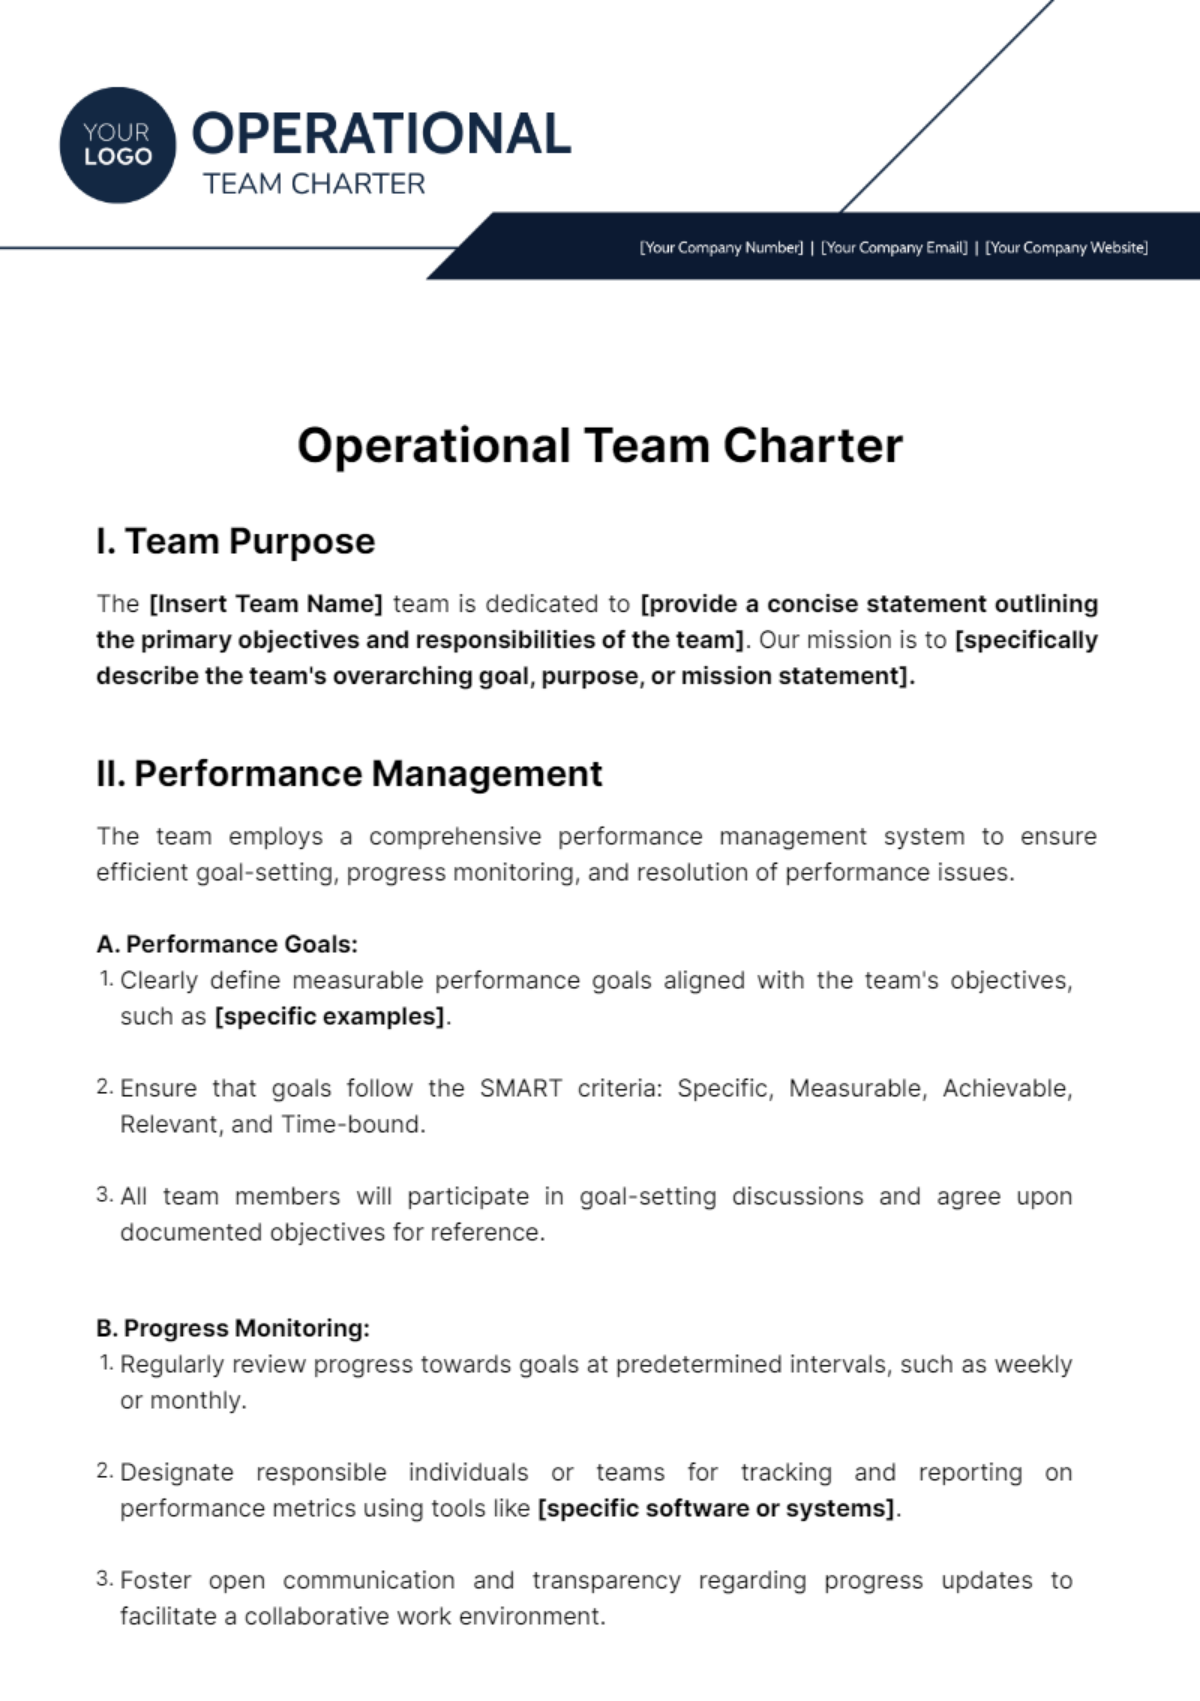 Free Operational Team Charter Template